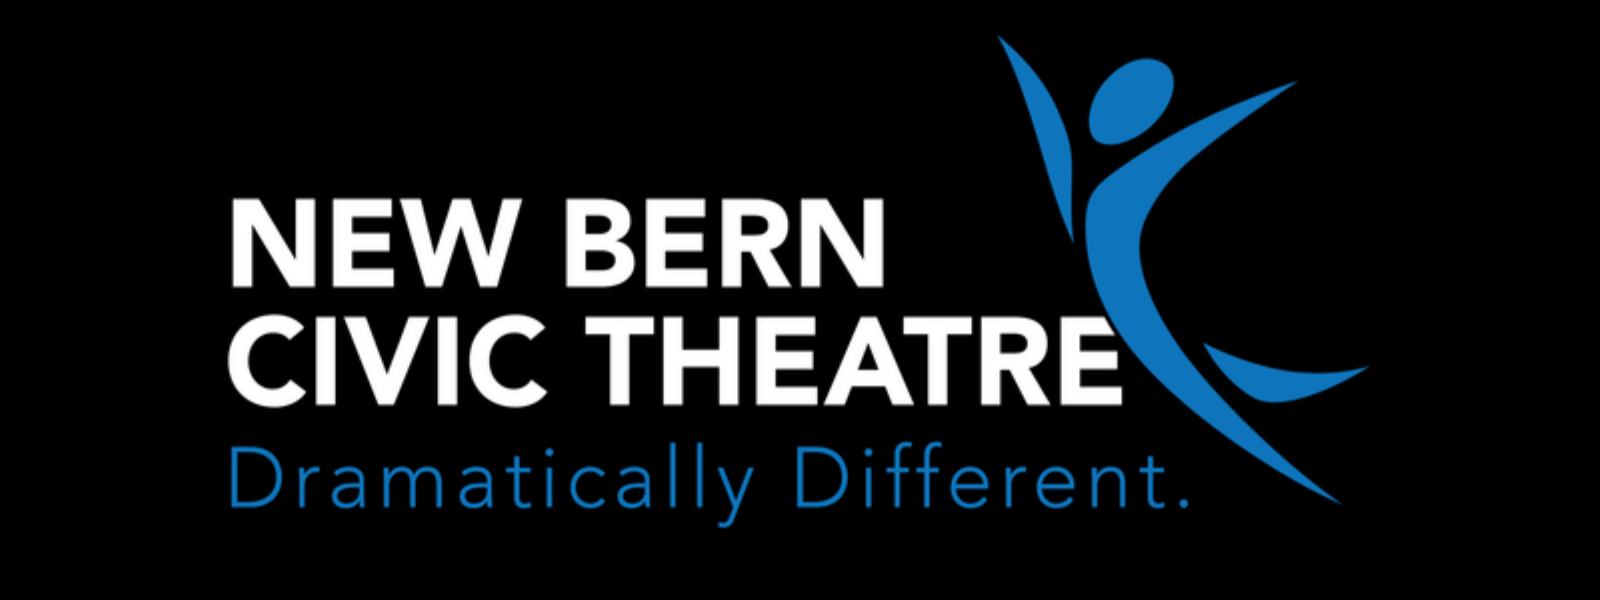 Happenings at the New Bern Civic Theatre New Bern’s Local News and